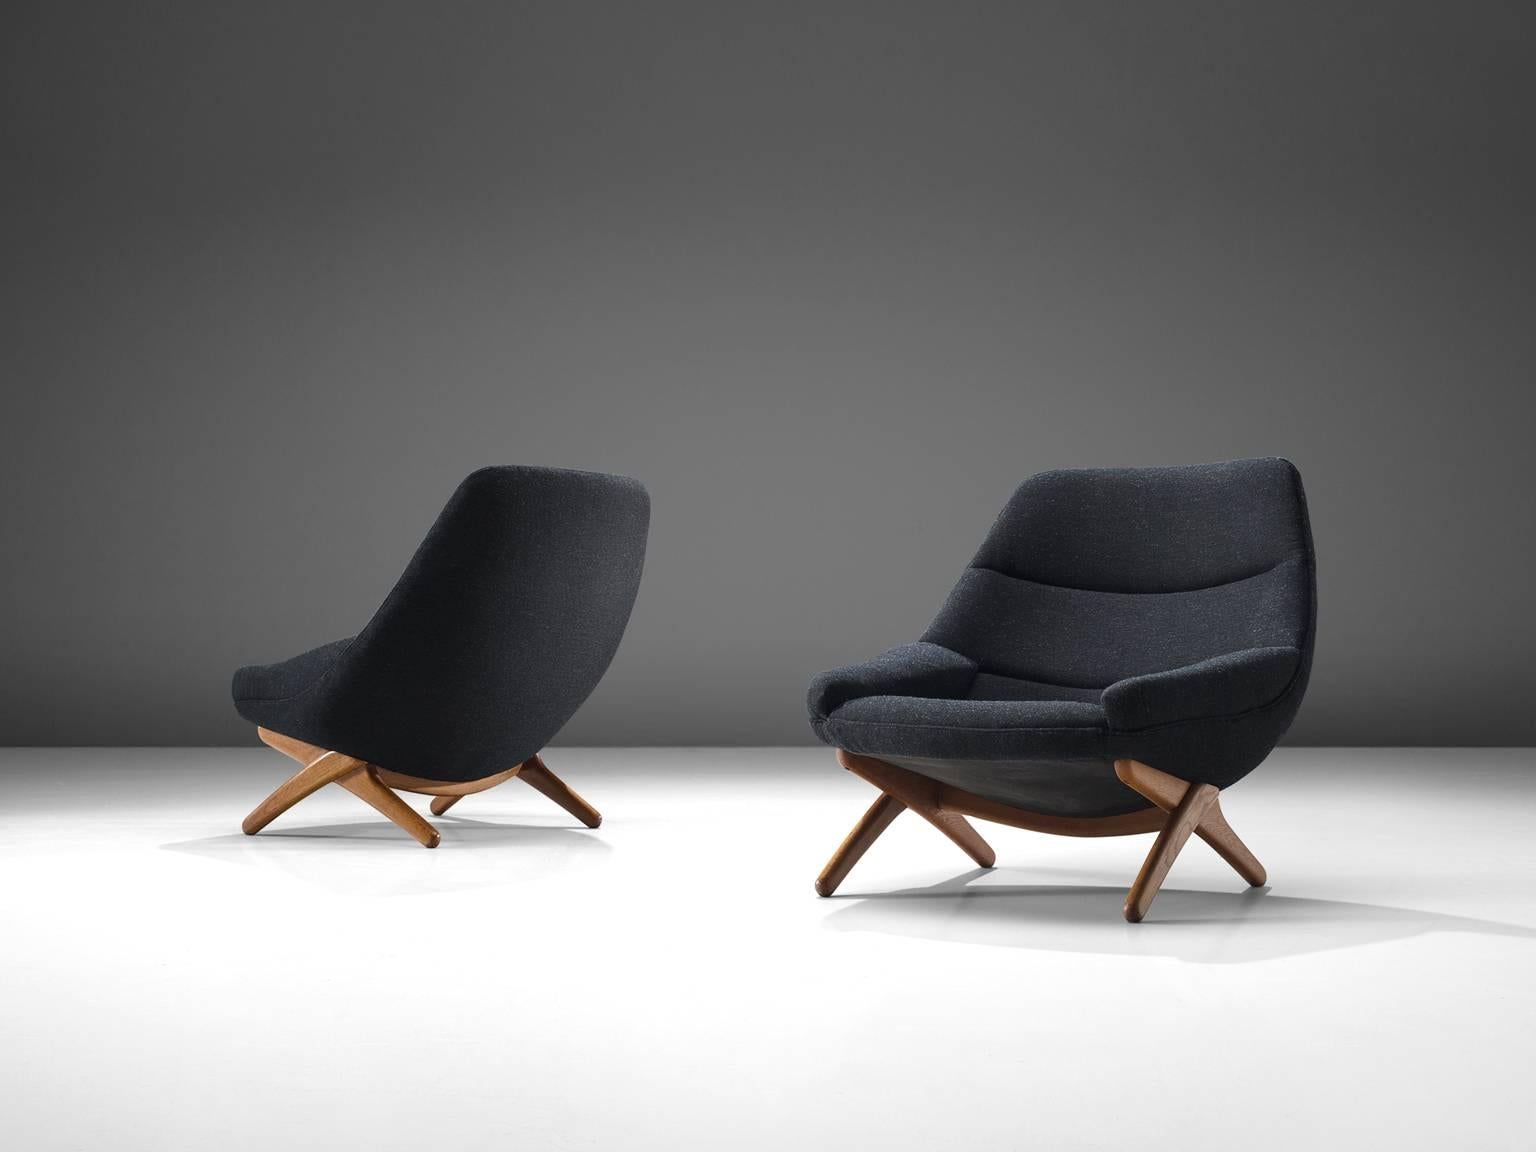 Illum Wikkelsø for Mikael Laursen, lounge chairs model 91, black to grey wool and oak, Denmark, 1960s. 

This set of ML 91 model lounge chairs was designed by Illum Wikkelsø and manufactured by Mikael Laursen in Denmark in the 1960s. This set is